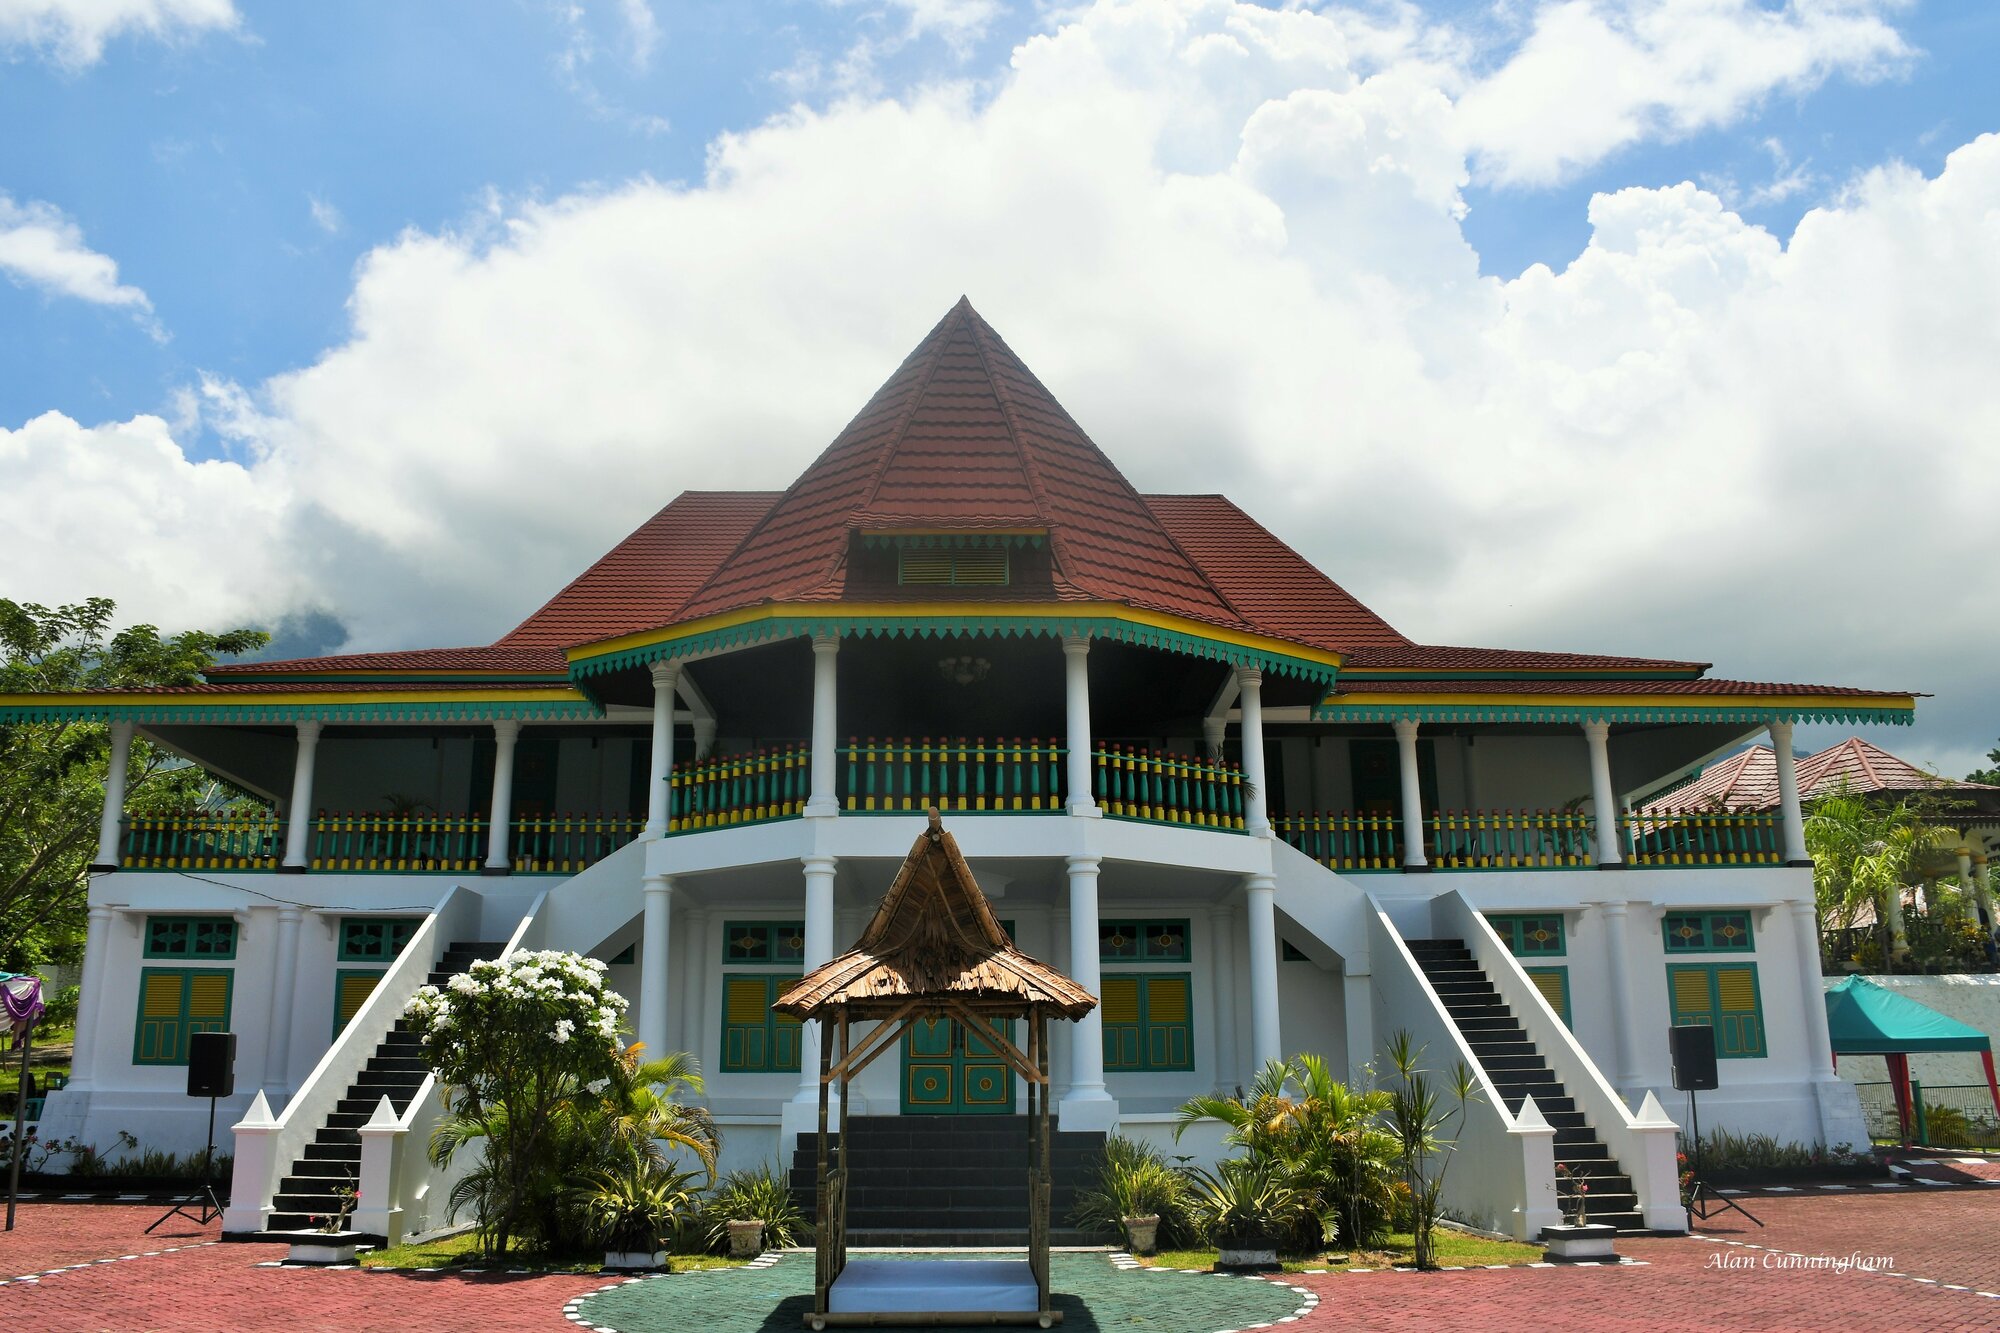 Sultan's Palace on the island of Tidore, Moluccas